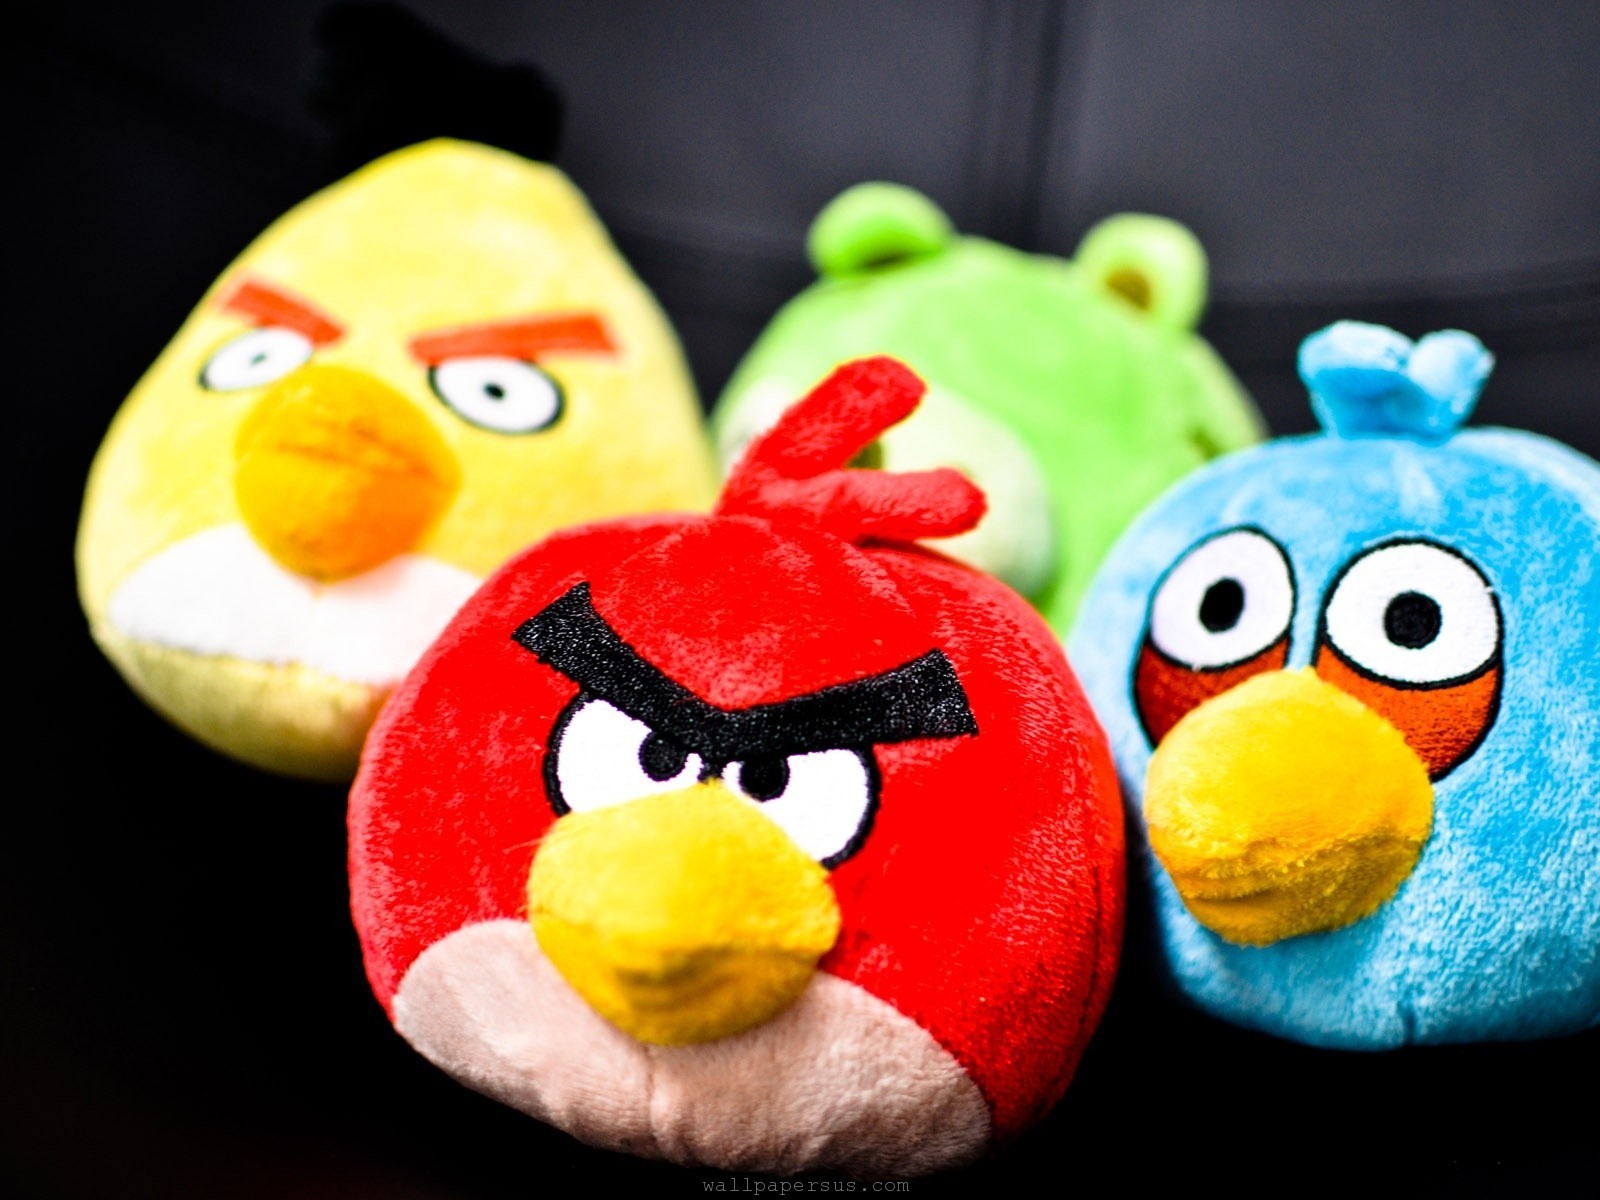 Angry Birds Game Wallpapers #16 - 1600x1200